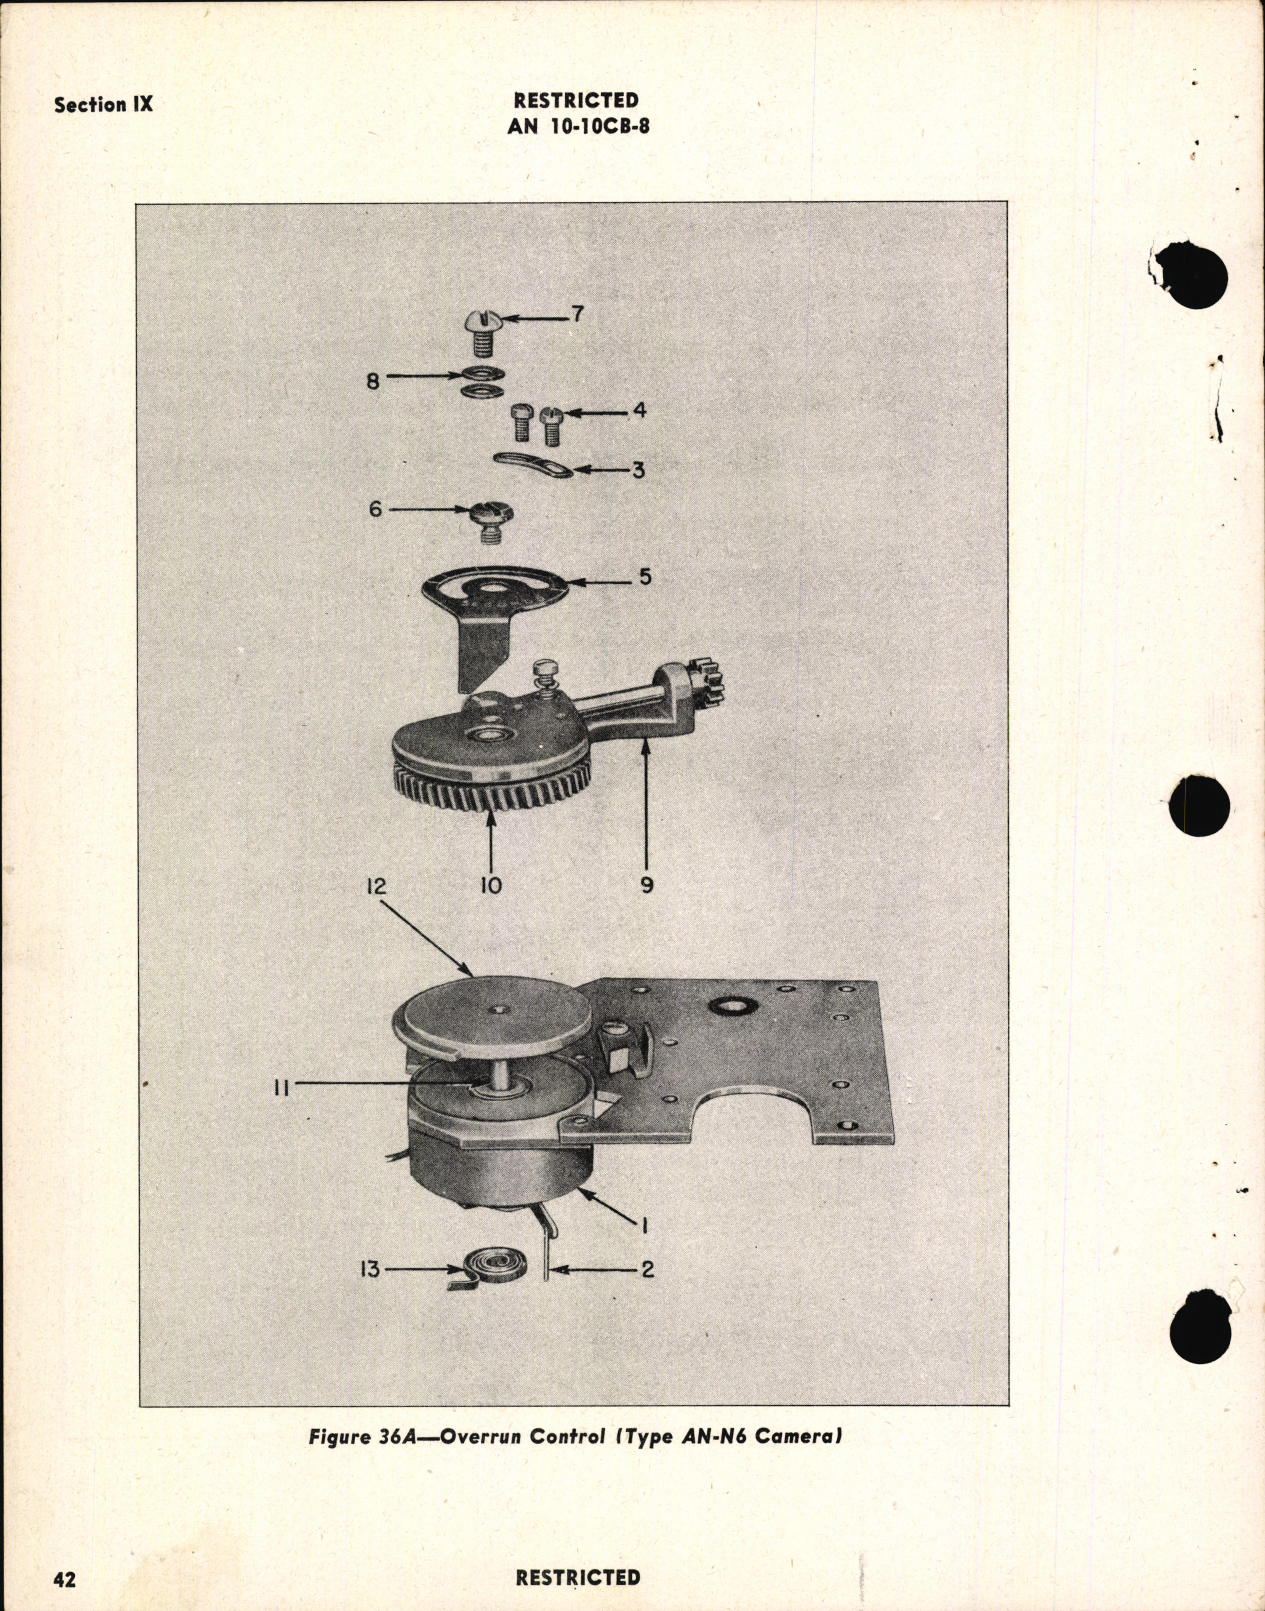 Sample page 8 from AirCorps Library document: Operation, Service, & Overhaul Instructions with Parts Catalog for N-6 and AN-N6 Gun Cameras